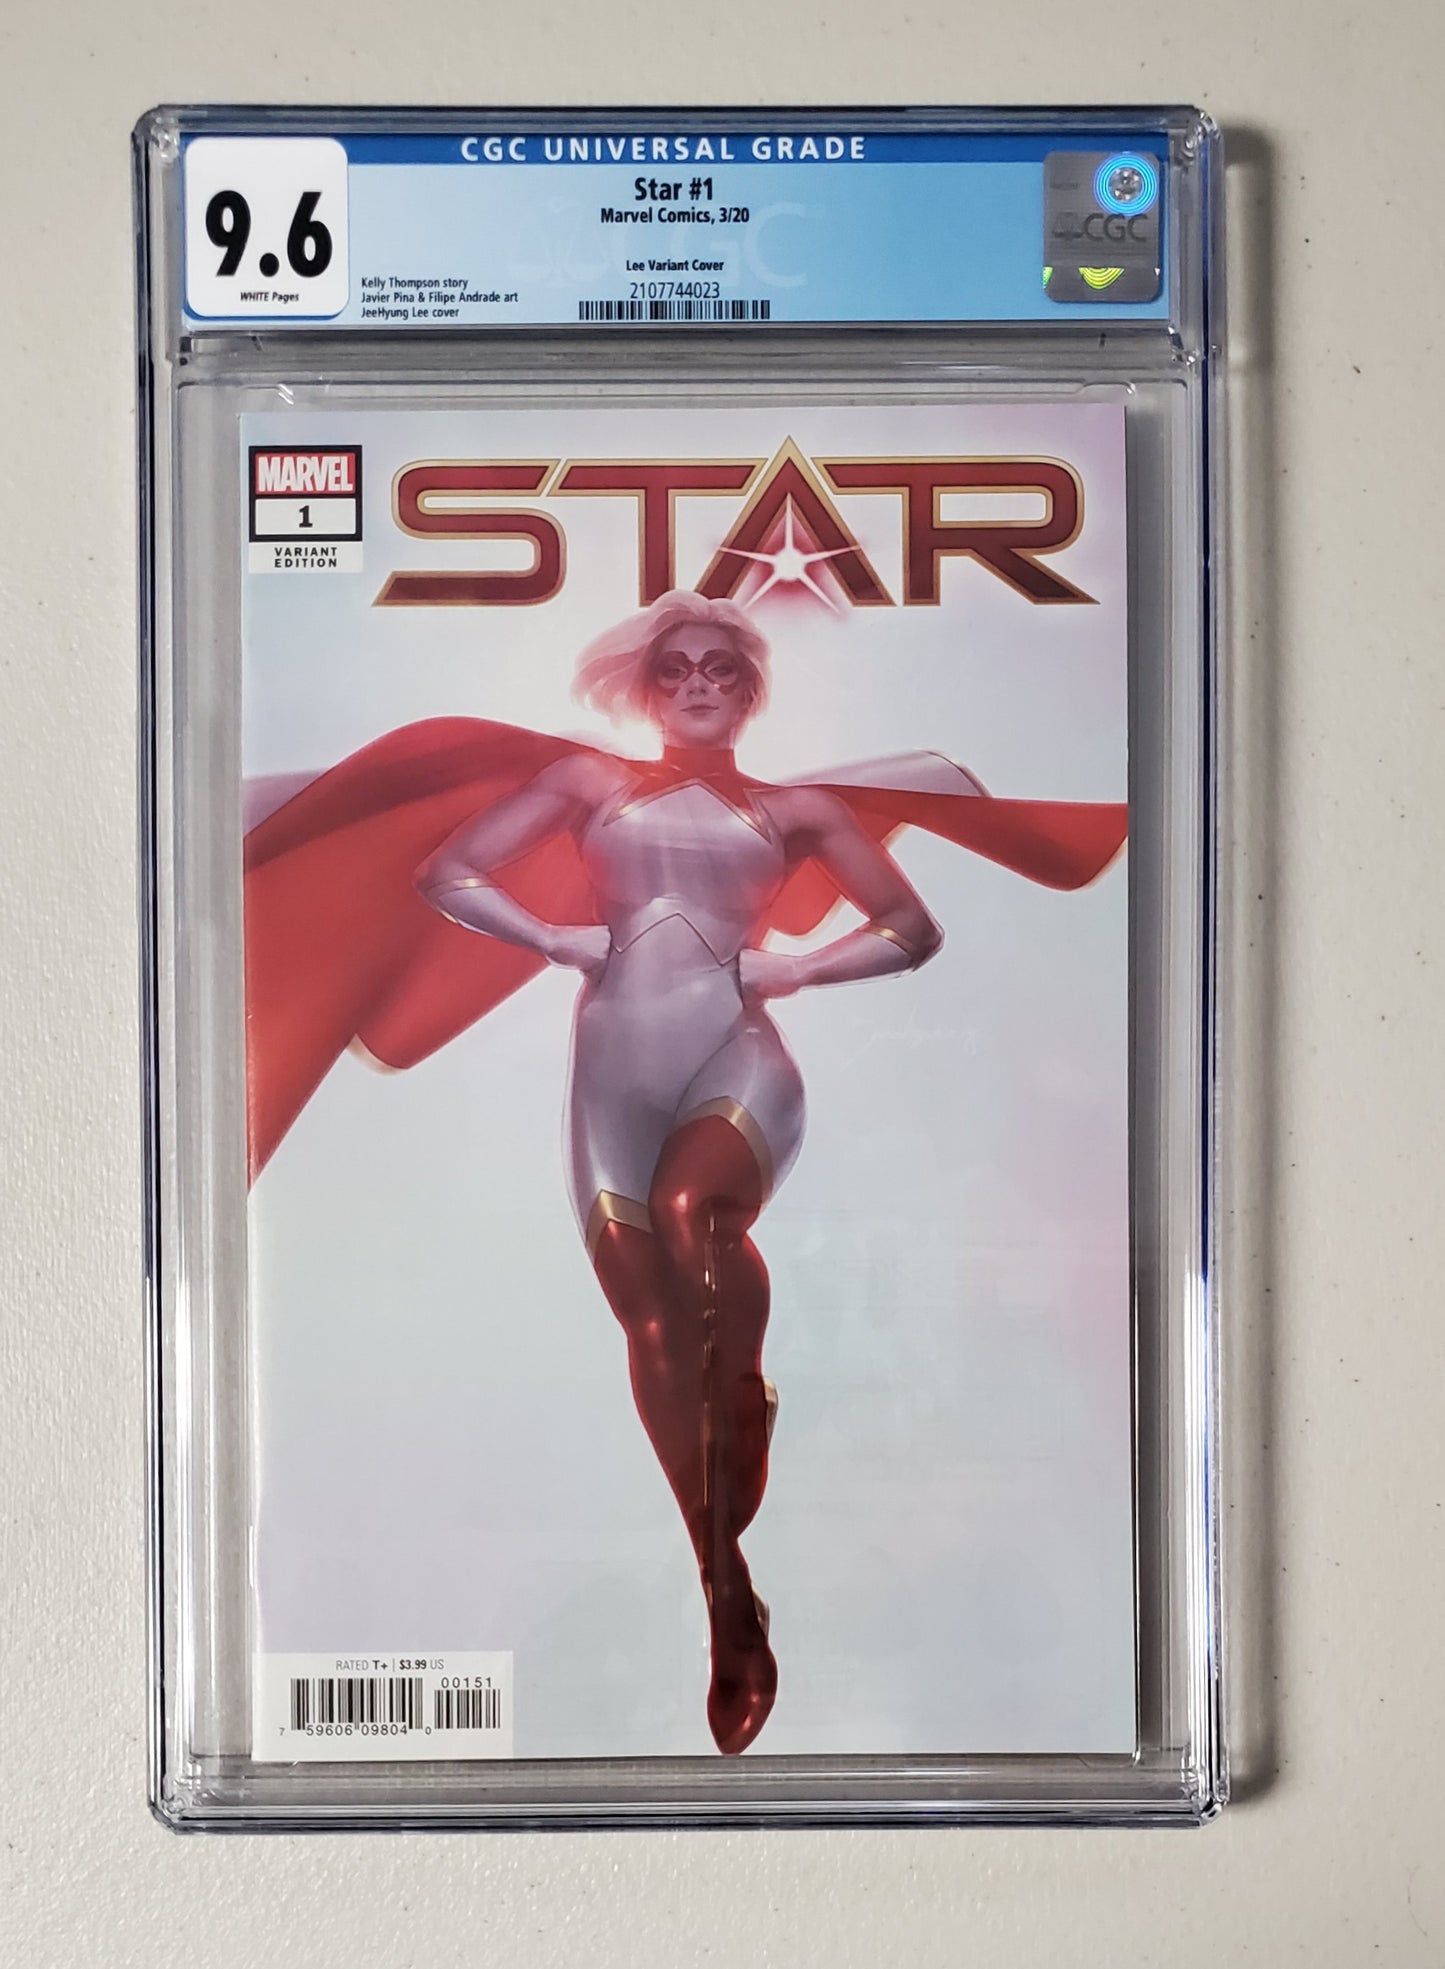 9.6 CGC STAR #1 JEEHYUNG LEE 1:100 VARIANT [2107744023]